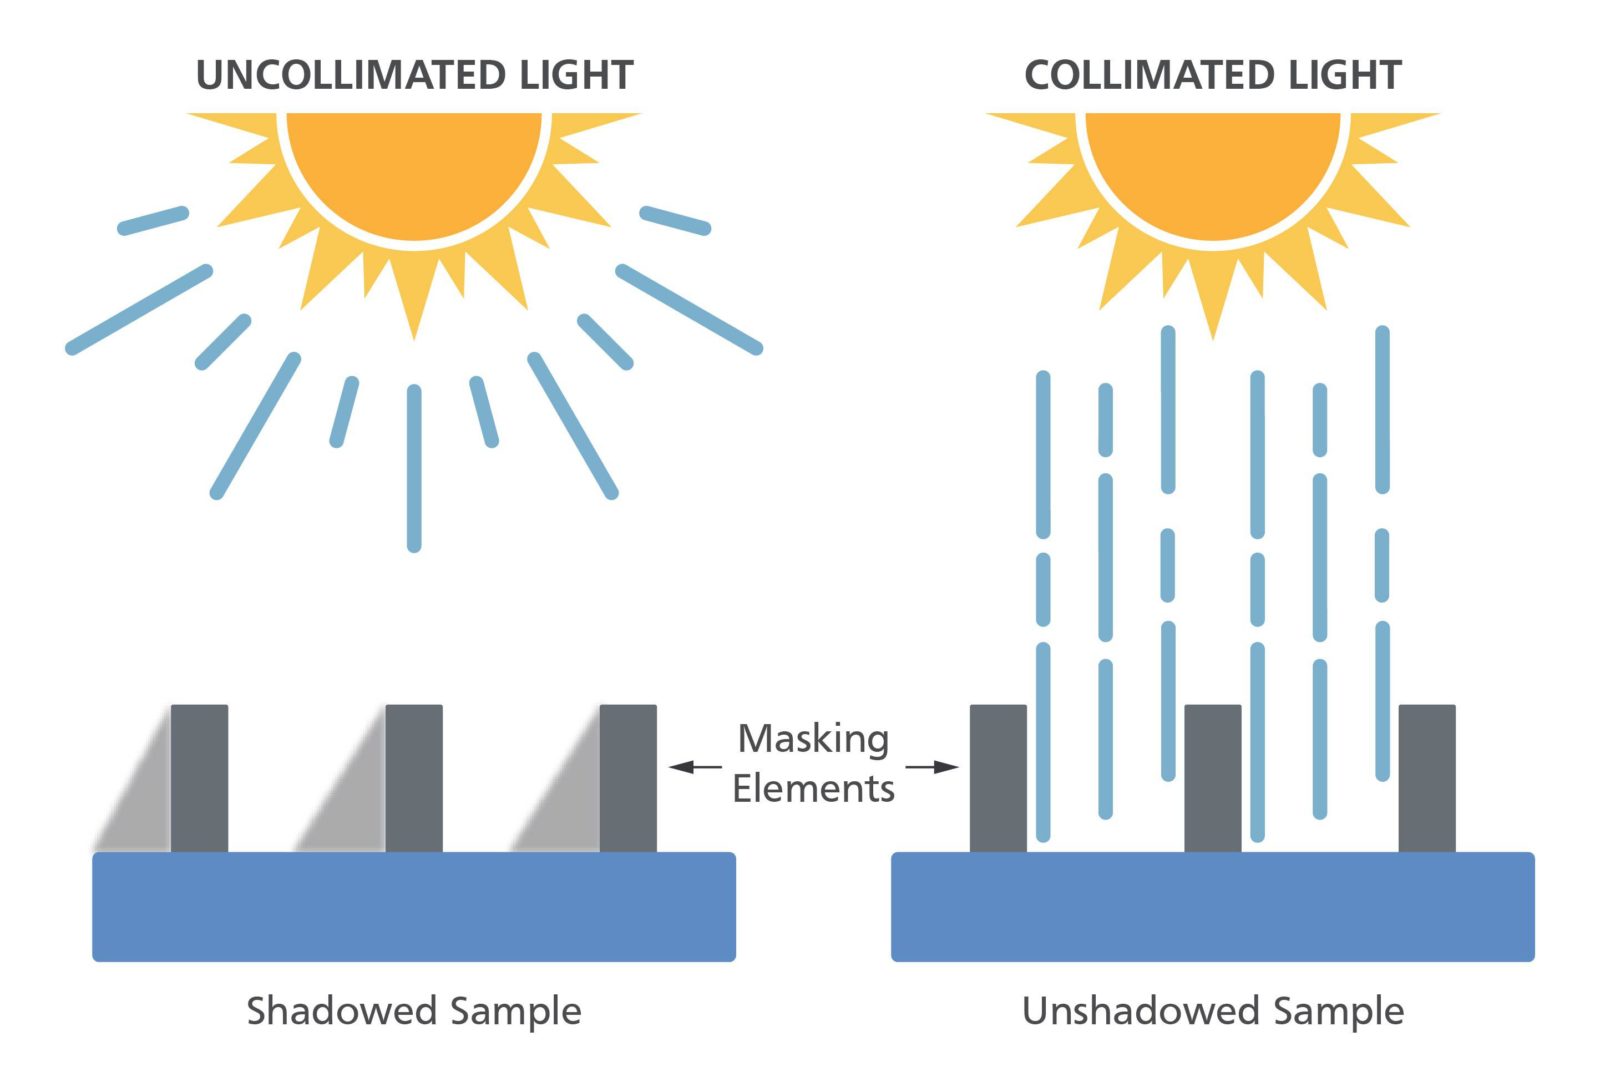 Illustration of how, under masked conditions, an uncollimated light source will result in shadowing that won’t occur under real (collimated) sunlight. There may be ways to compensate for this effect depending on the application. 